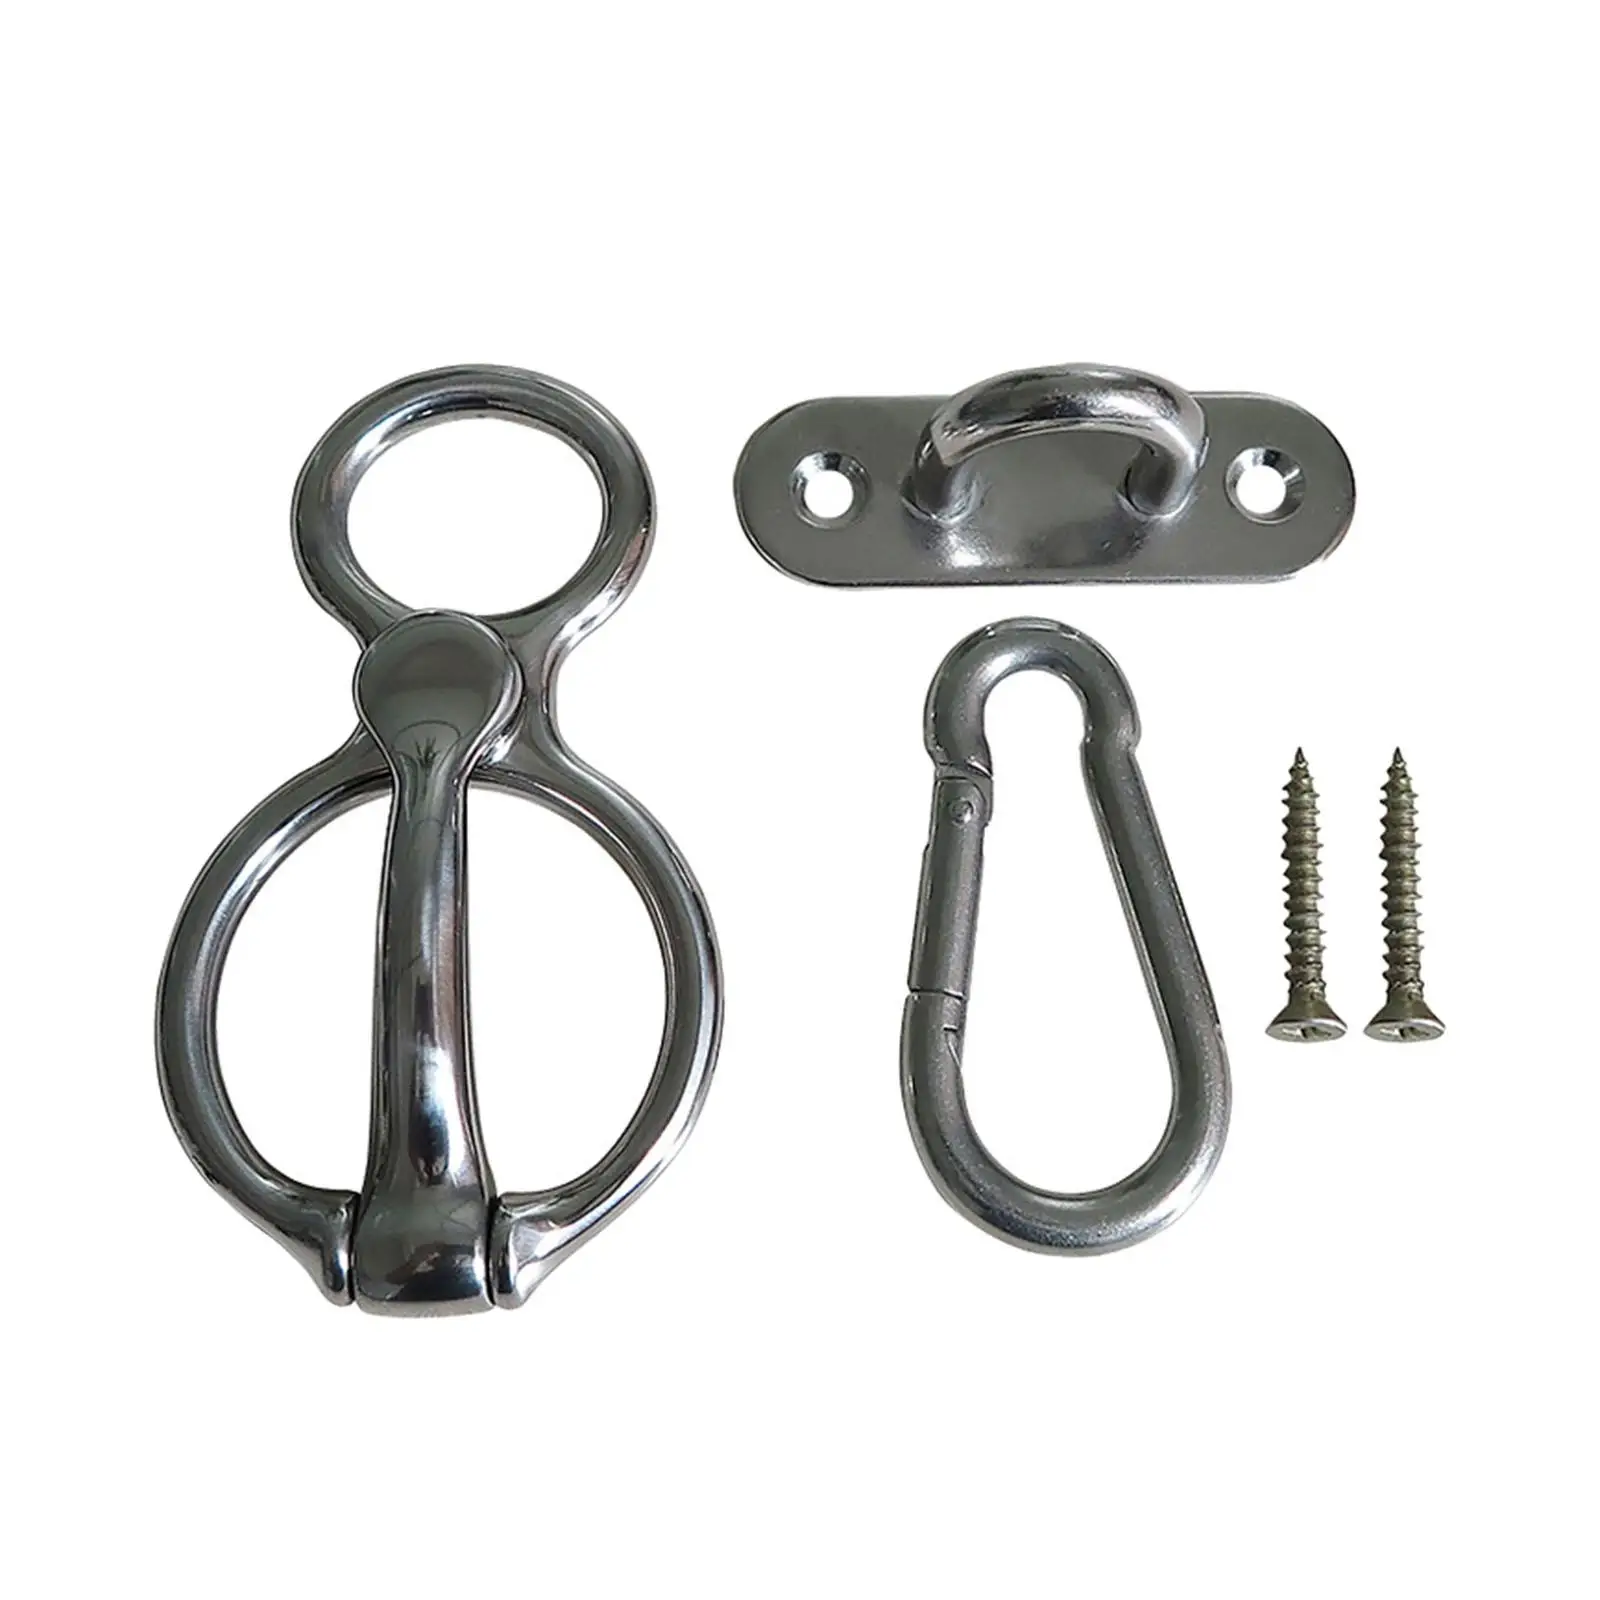 Horse Tie Ring Stainless Steel Fasteners with Eye Bolt Quick Snap Outdoor Sports Equestrian Livestock Tie Off Accessories